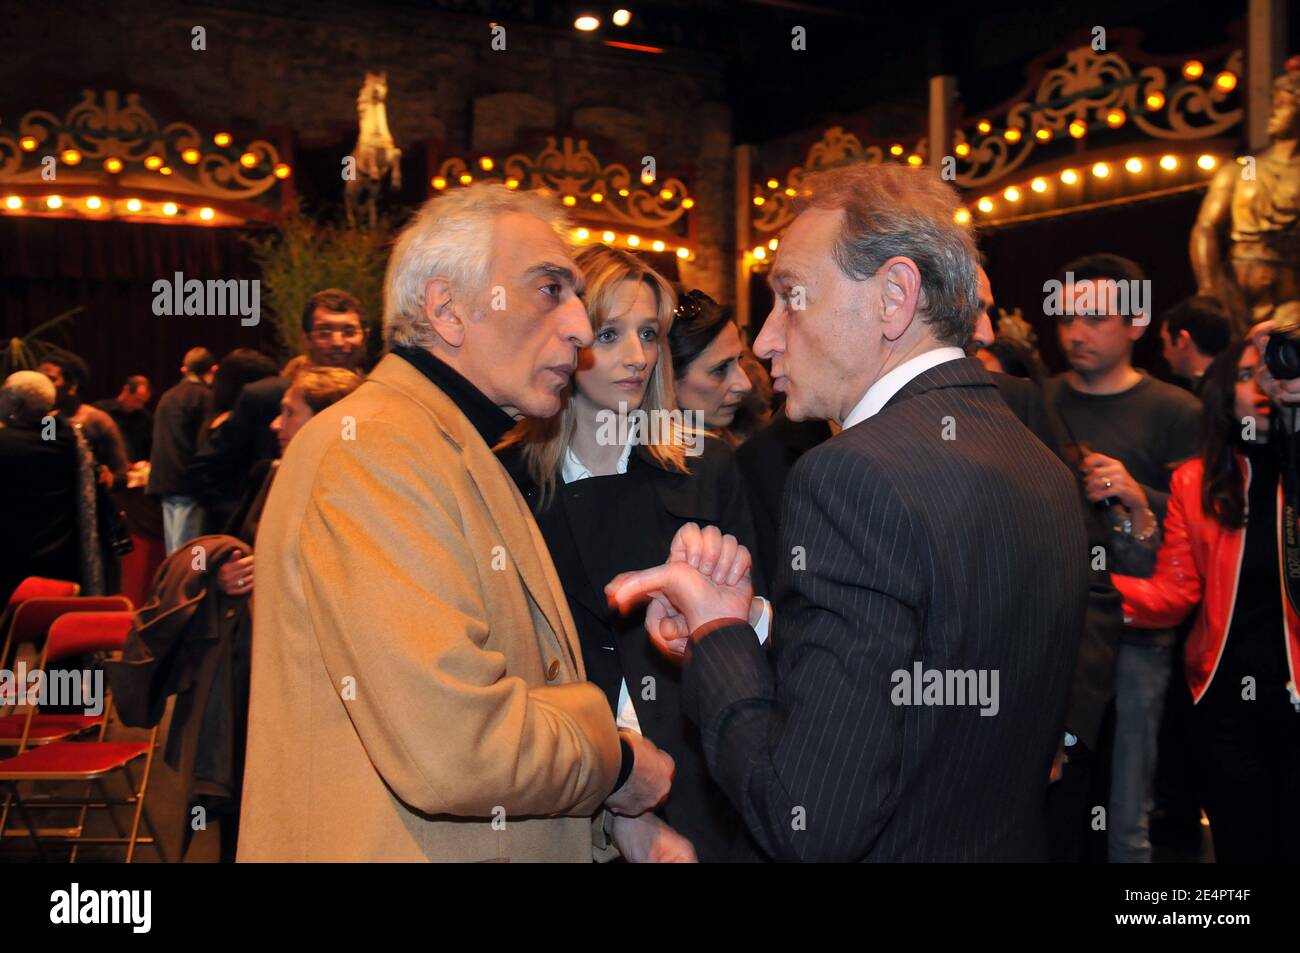 Paris Mayor Bertrand Delanoe and French actor Gerard Darmon and his girlfriend seen during a meeting to support Bertrand Delanoe for mayoral elections at the 'Musee des Arts Forains' in Paris, France, on February 18, 2008. Photo by Ammar Abd Rabbo/ABACAPRESS.COM Stock Photo